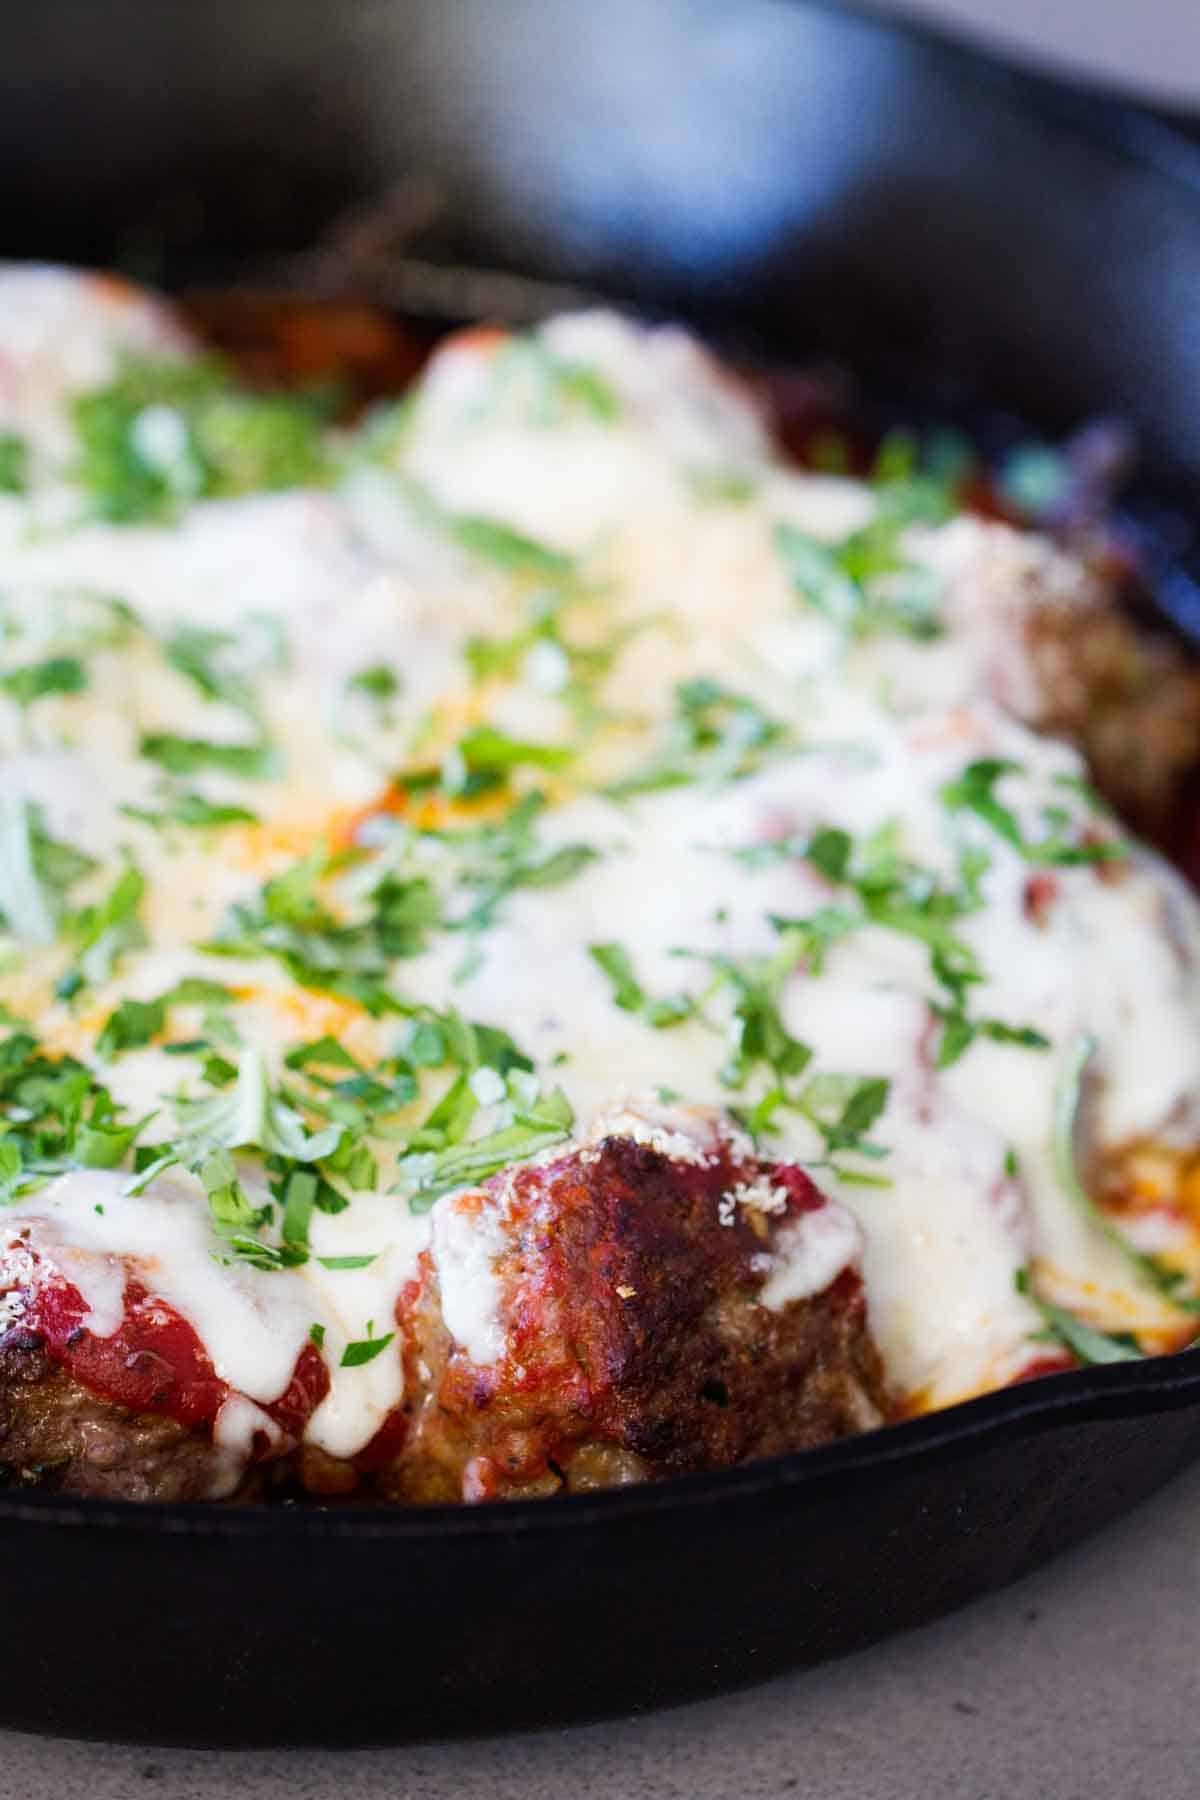 Meatballs and sauce in a skillet topped with melted mozzarella cheese.